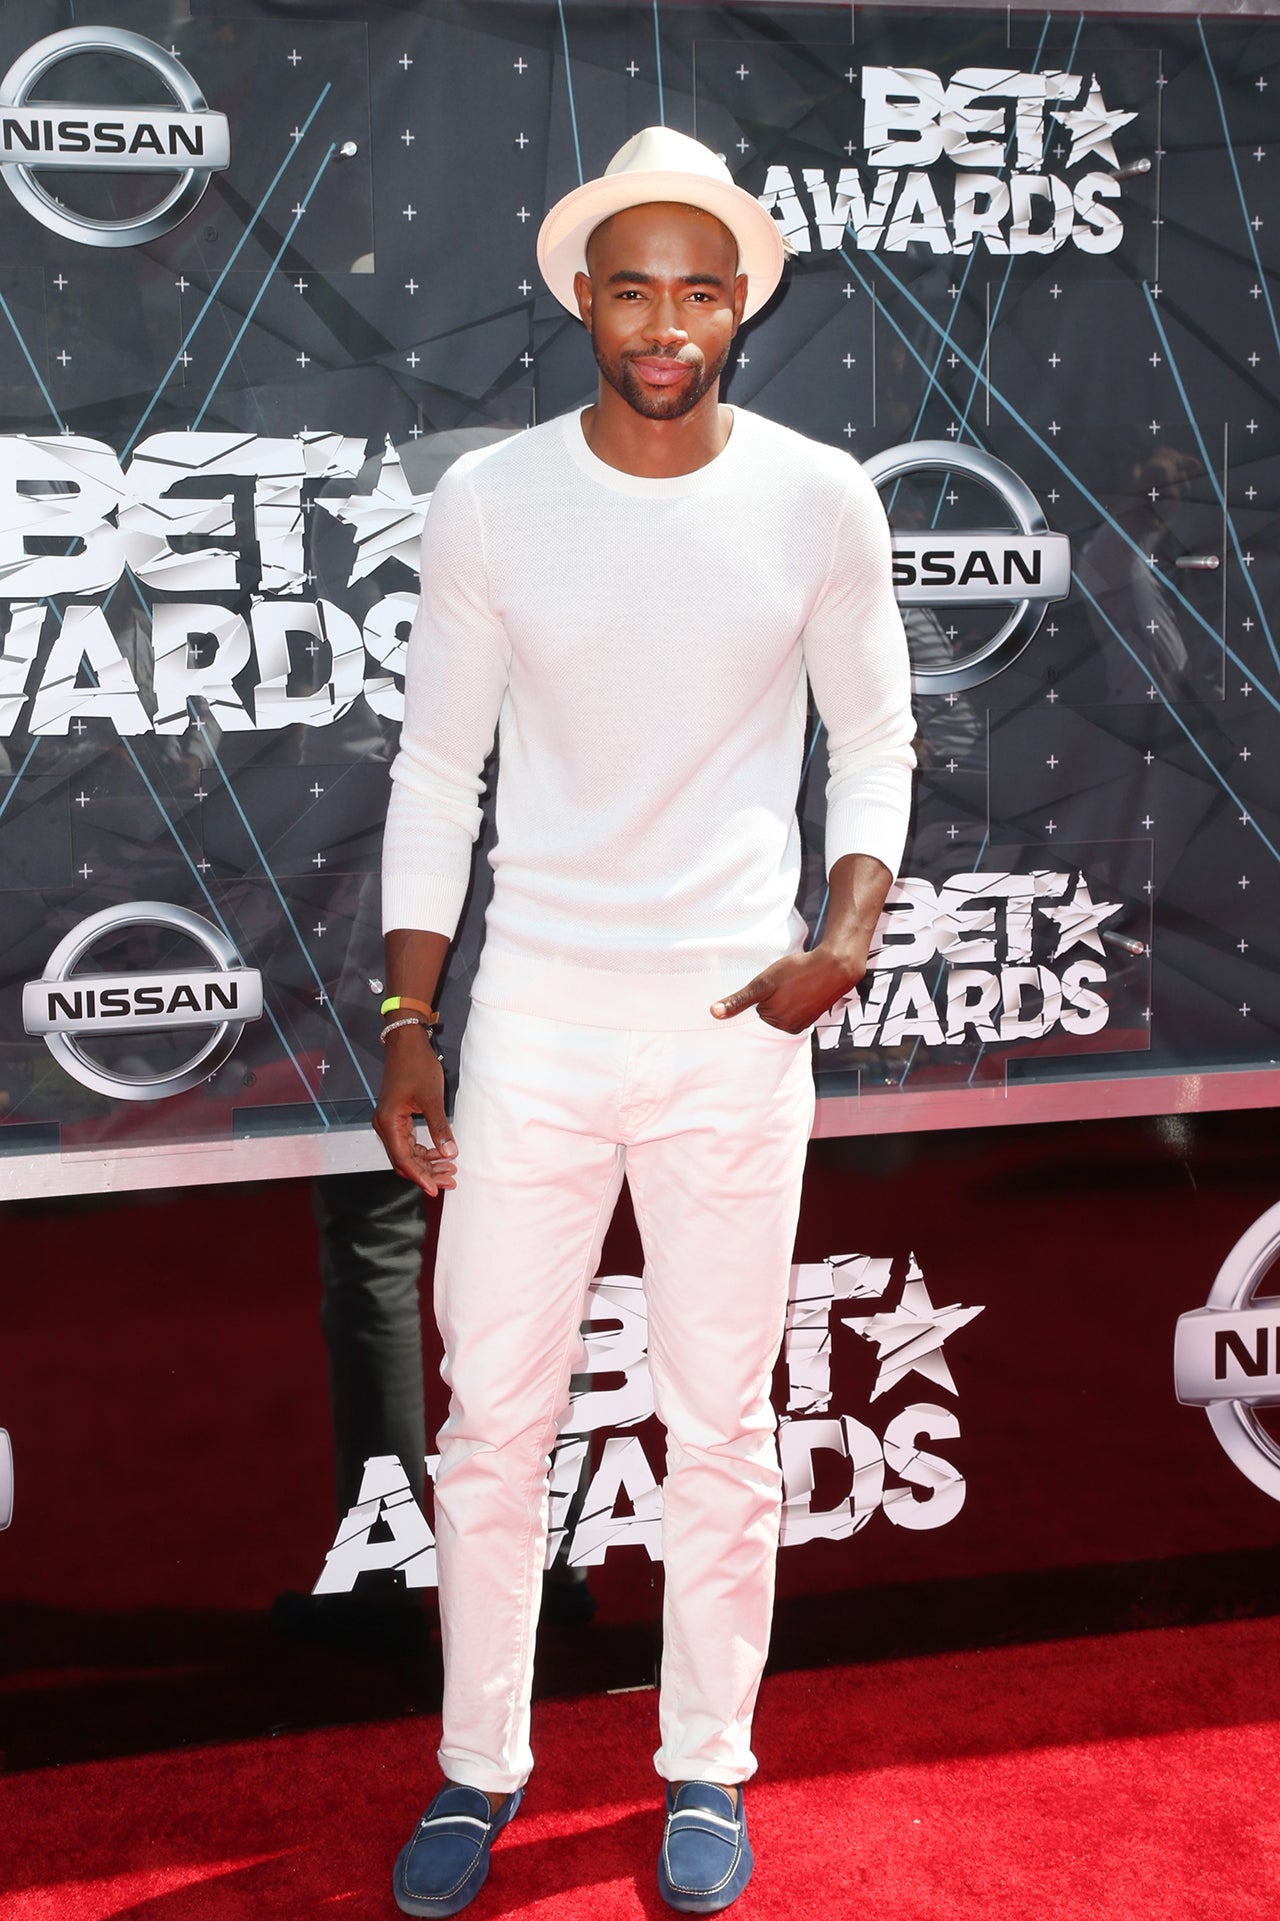 The Hottest Looks from the BET Awards Red Carpet
